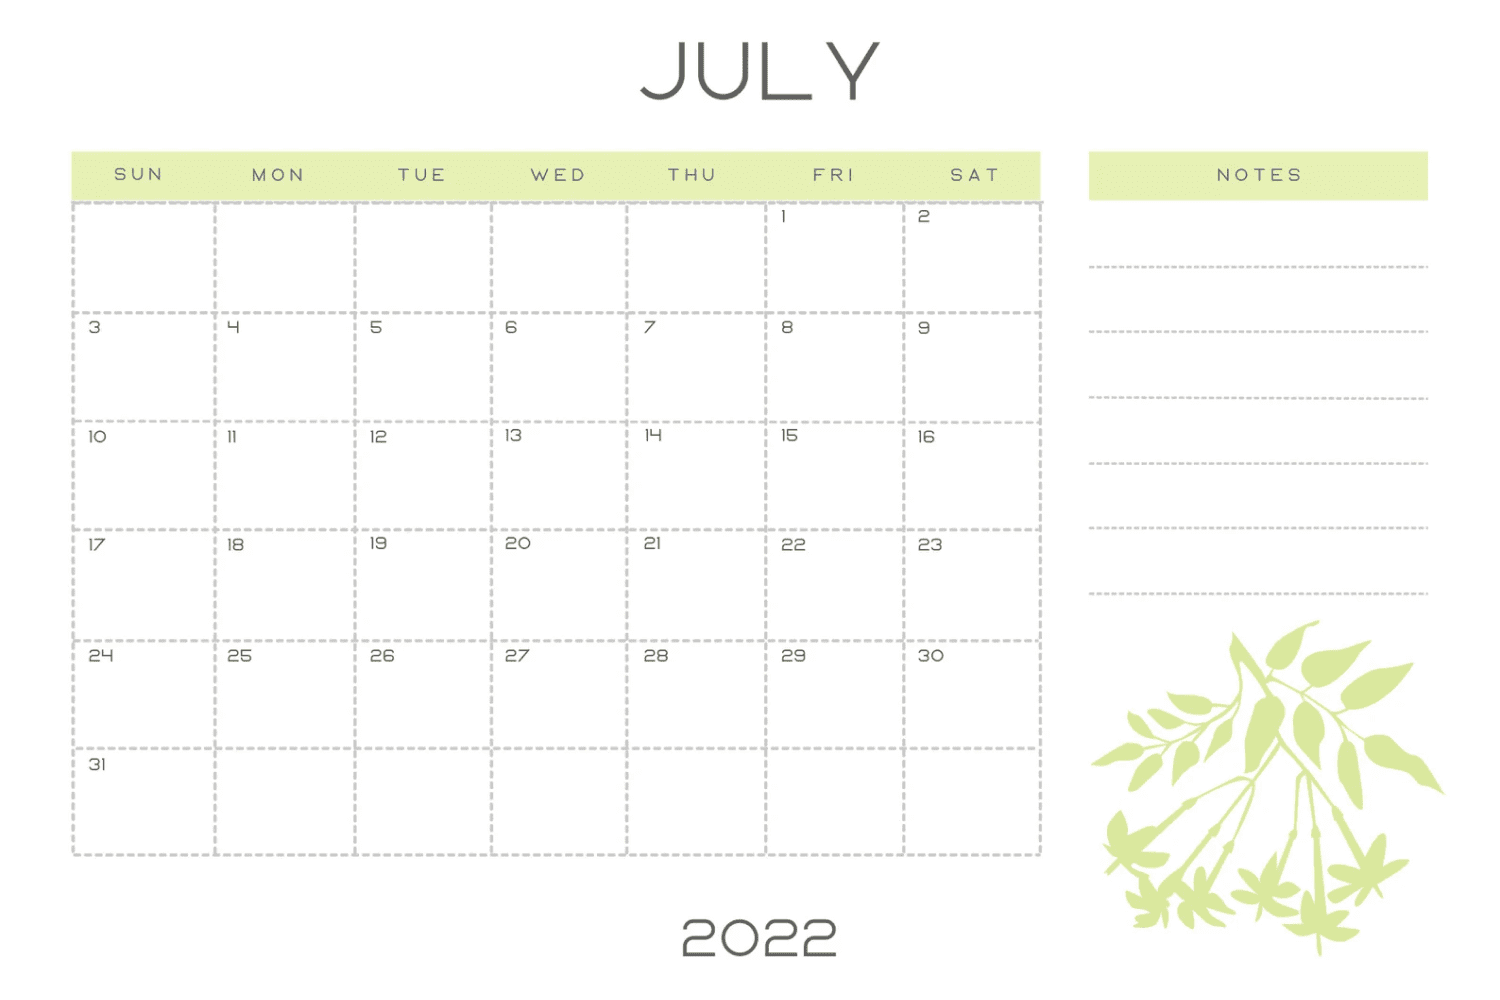 Calendar in light green color with a field for notes.